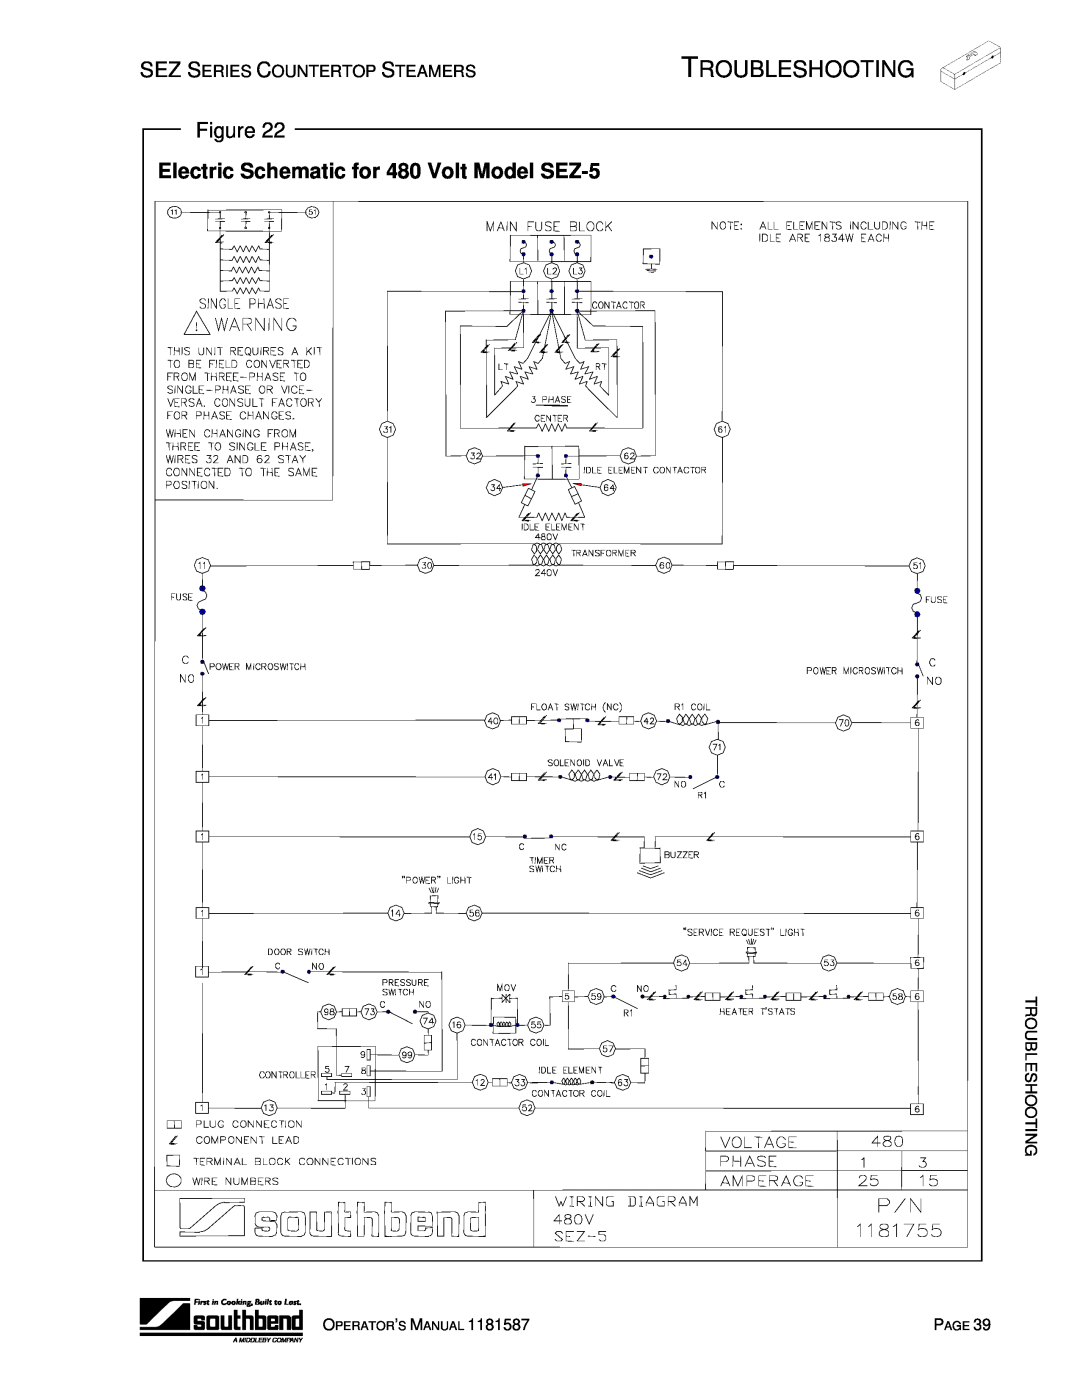 Southbend SEZ-3 manual Electric Schematic for 480 Volt Model SEZ-5, Troubleshooting 